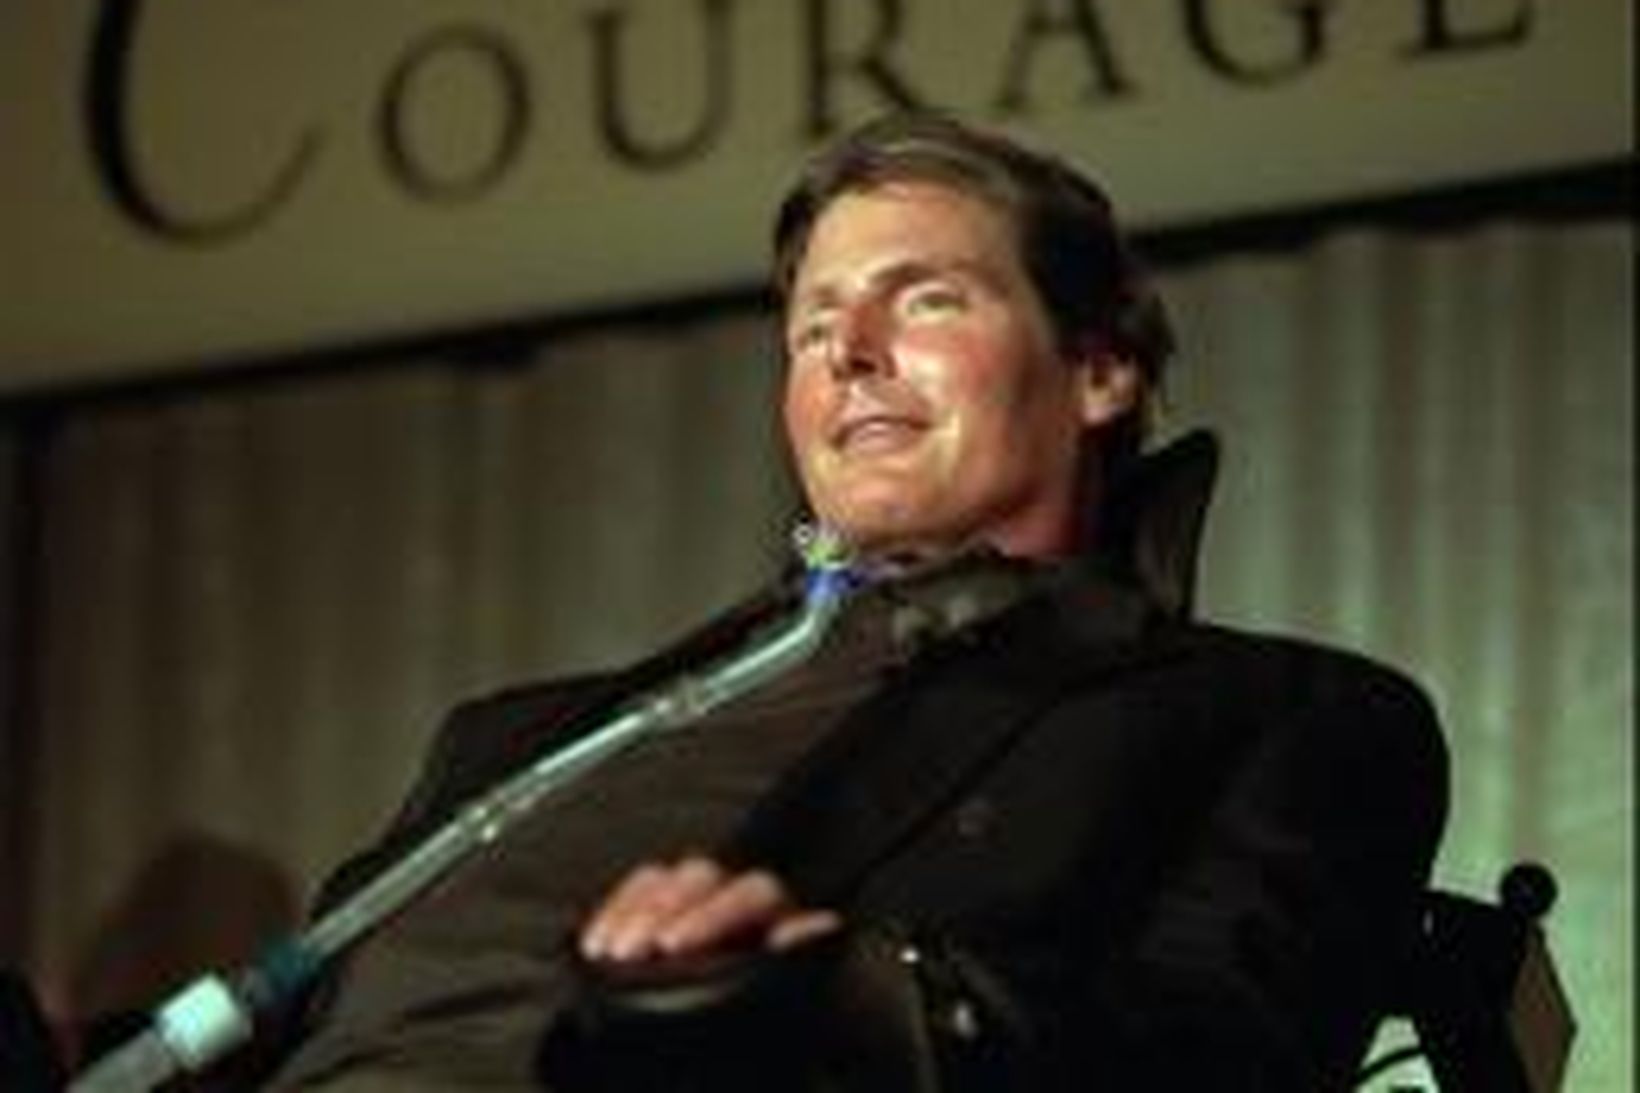 Christopher Reeve.